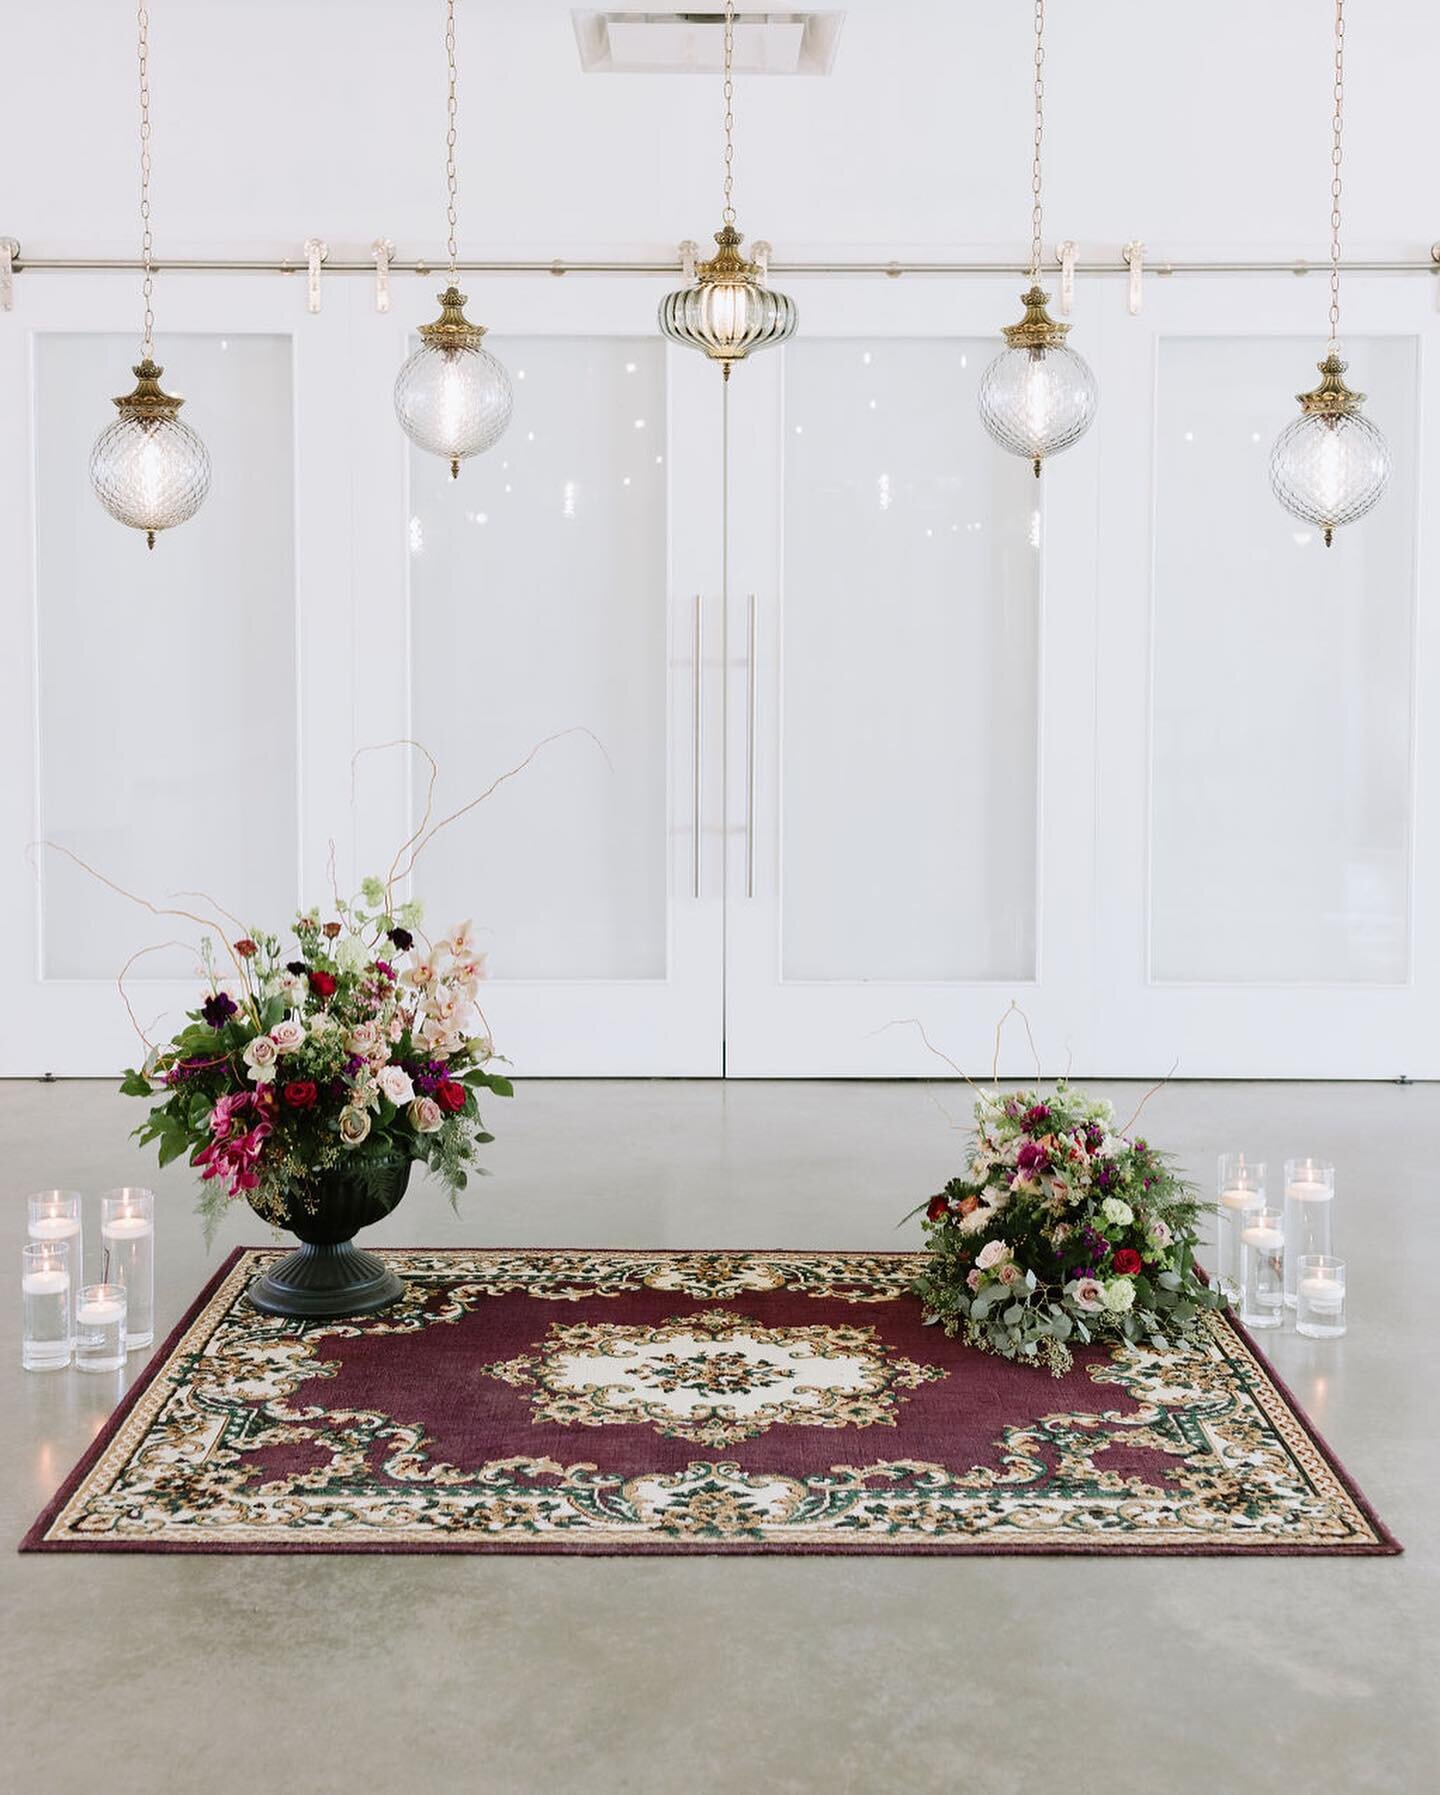 𝐅 𝐋 𝐎 𝐀 𝐓 𝐈 𝐍 𝐆  𝐀 𝐑 𝐂 𝐇 𝐖 𝐀 𝐘 𝐒 |
An ongoing love story featuring our Smoke Collection. 
What we love most about these lighting packages is that they are SO versatile! Create a breathtaking aisle or alter, and then flip it into your 